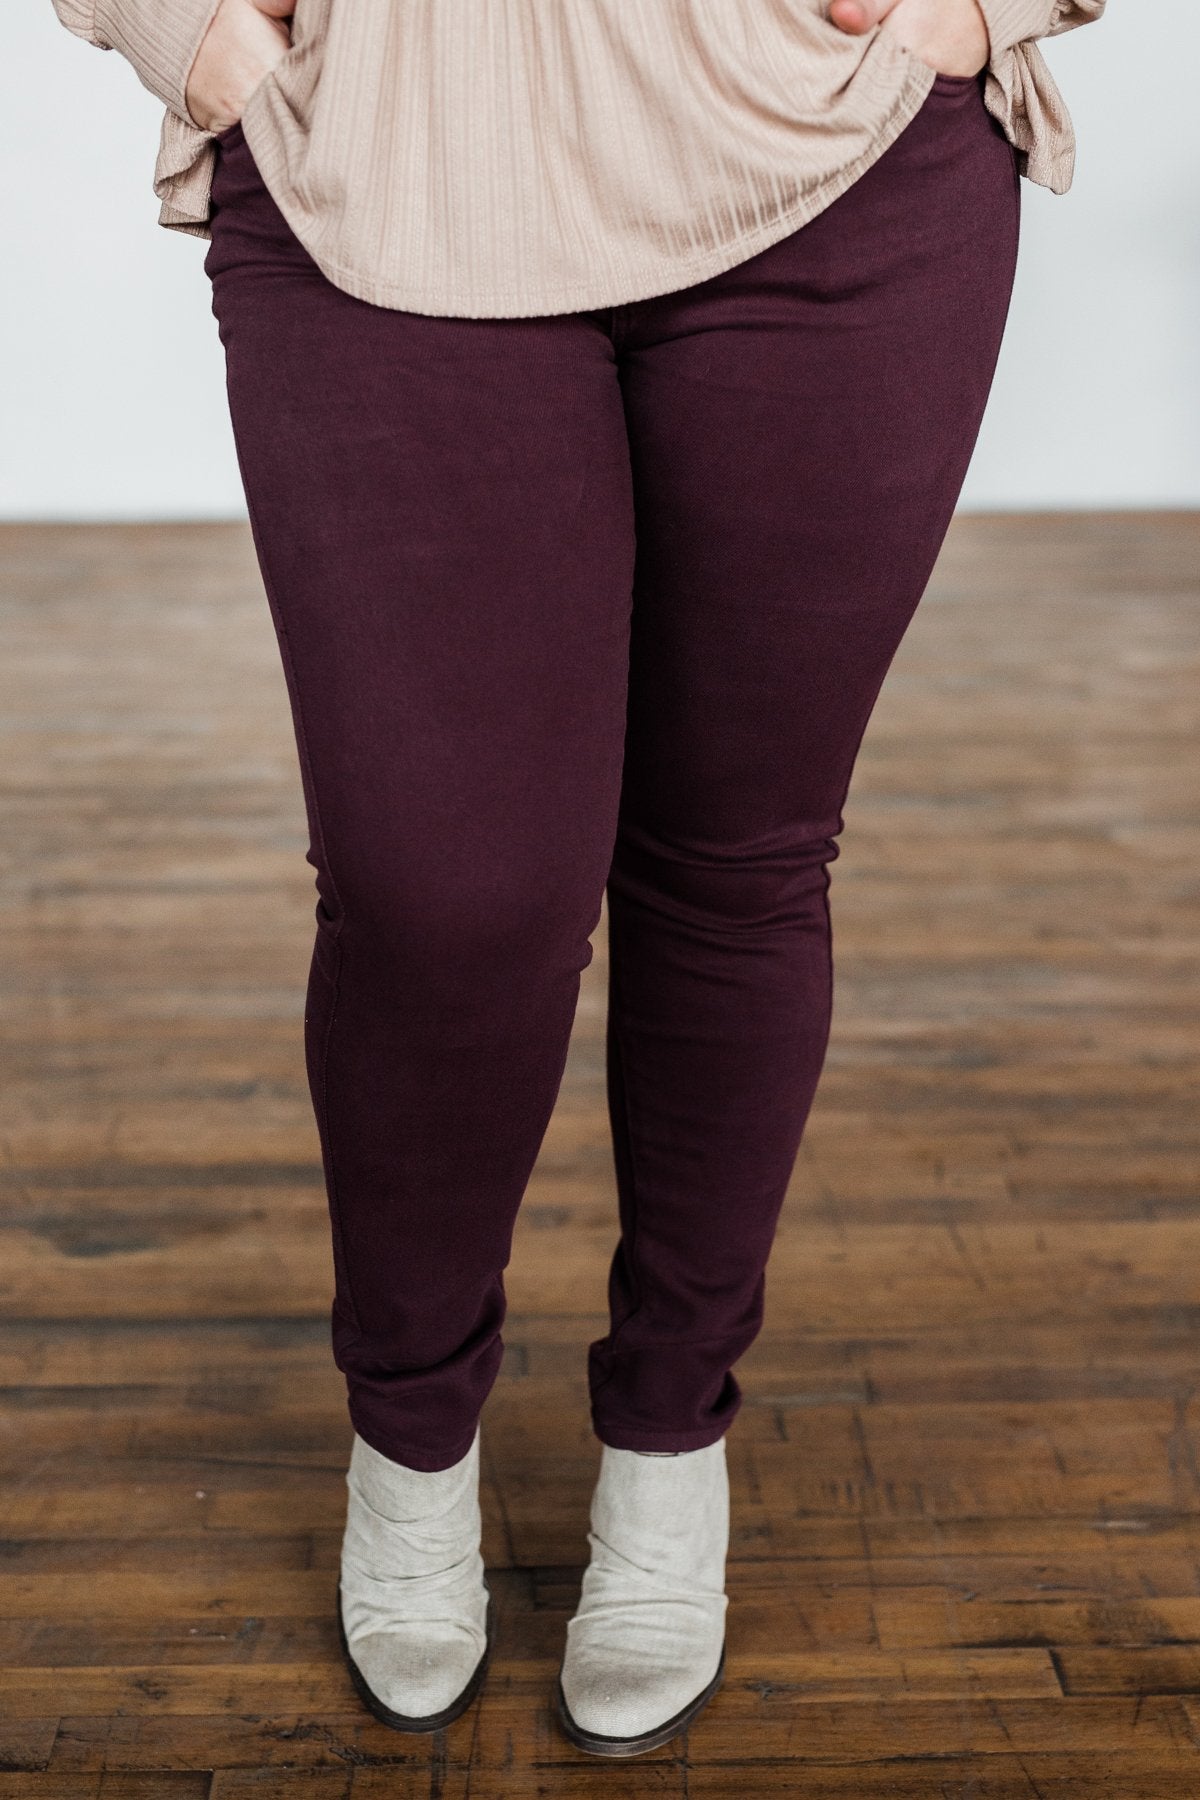 KanCan Colored Skinny Jeans- Camille Wash